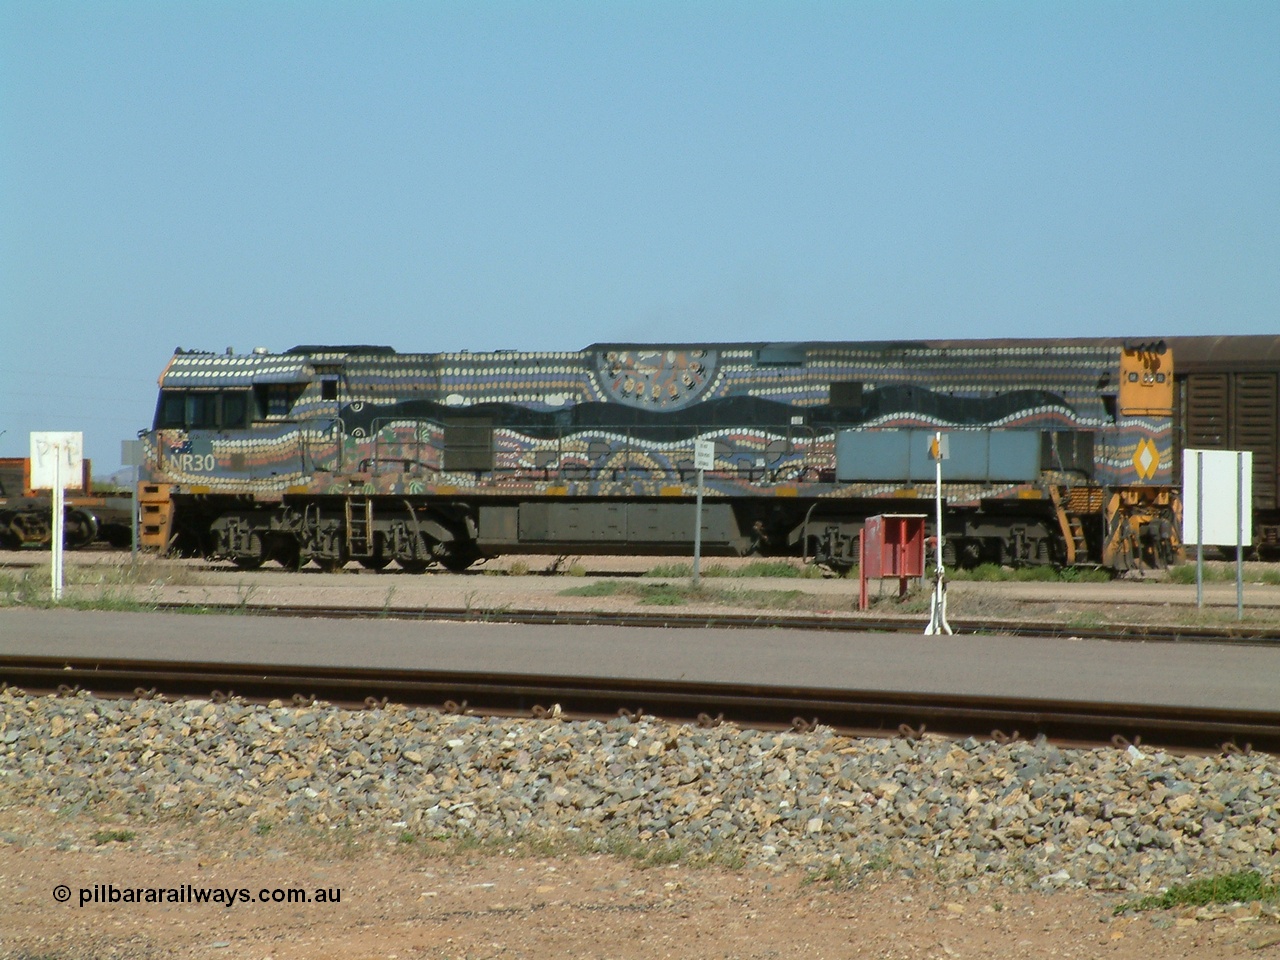 030404 103013
Port Augusta, Goninan built GE model Cv40-9i NR class unit NR 30 serial 7250-05 / 97-232 was painted in a Bessie Liddle of Alice Springs designed aboriginal livery titled 'Warmi' or the snake, John Moriarty of Balarinji Design did the artwork.
Keywords: NR-class;NR30;7250-05/97-232;Goninan;GE;Cv40-9i;